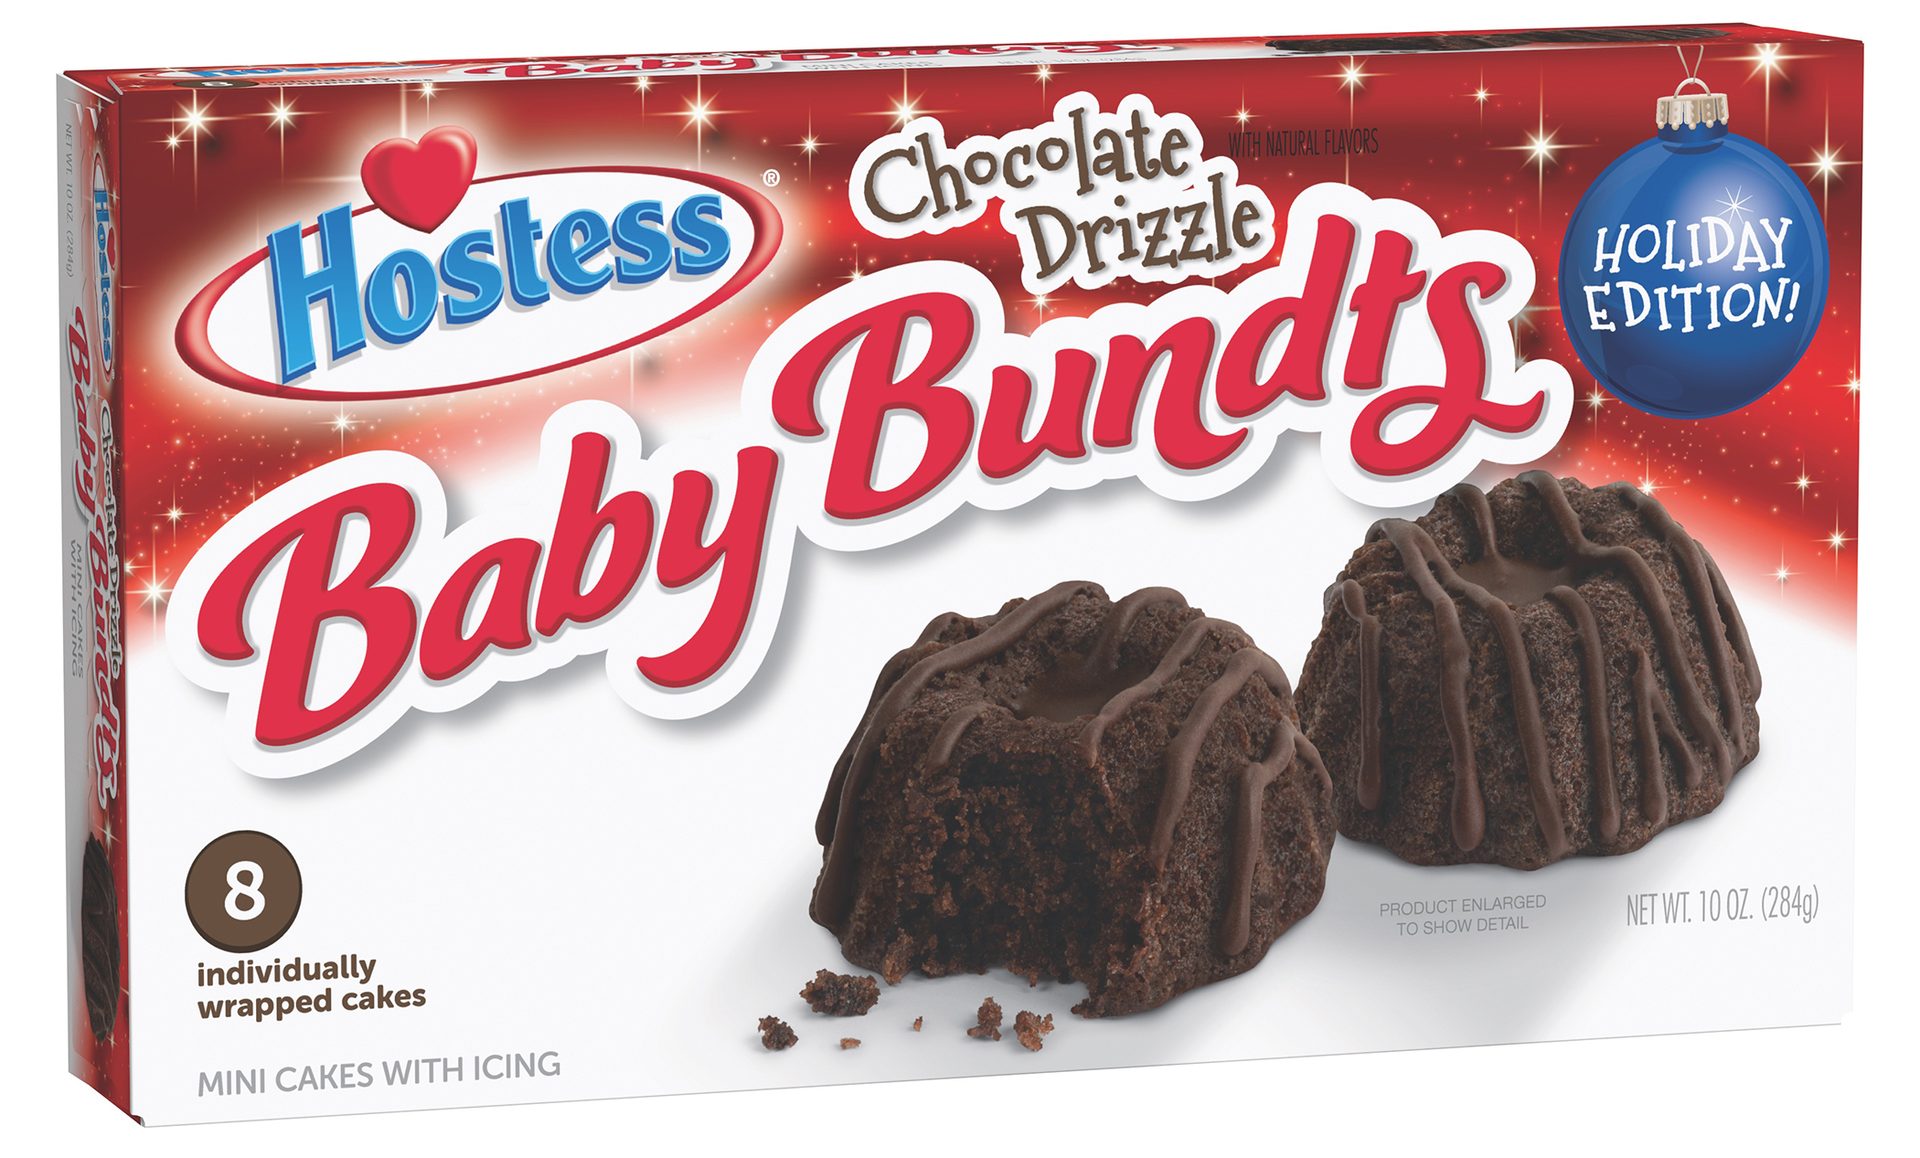 Hostess Holiday Chocolate Drizzle Baby Bundts Multi Pack